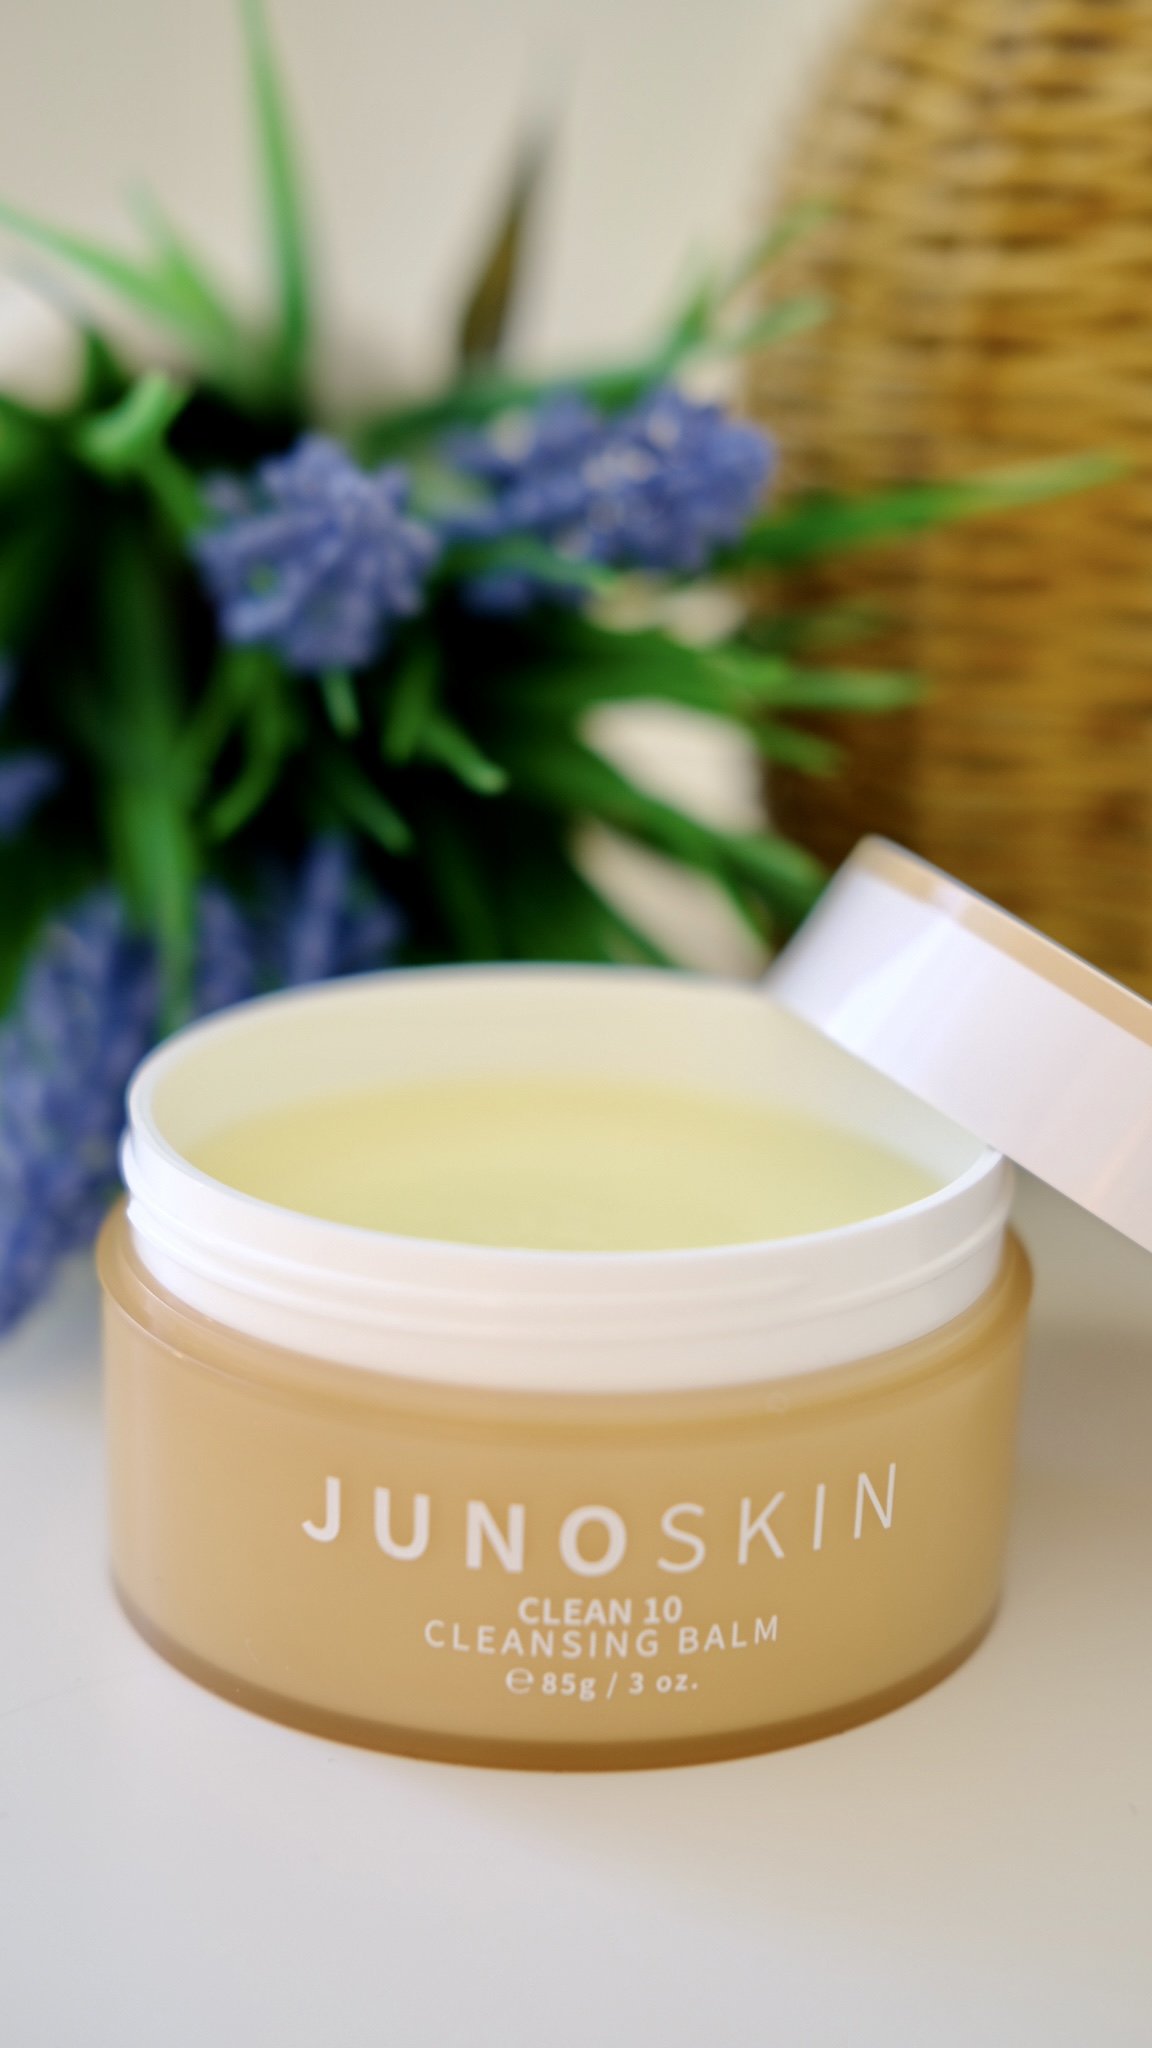 I am excited to share my JUNOCO Clean 10 Cleansing Balm Review!  JUNOCO is a clean, affordable skincare company that is based out of San Francisco. JUNOCO has lots of great skincare, but today I am specifically talking about their hero cleansing balm